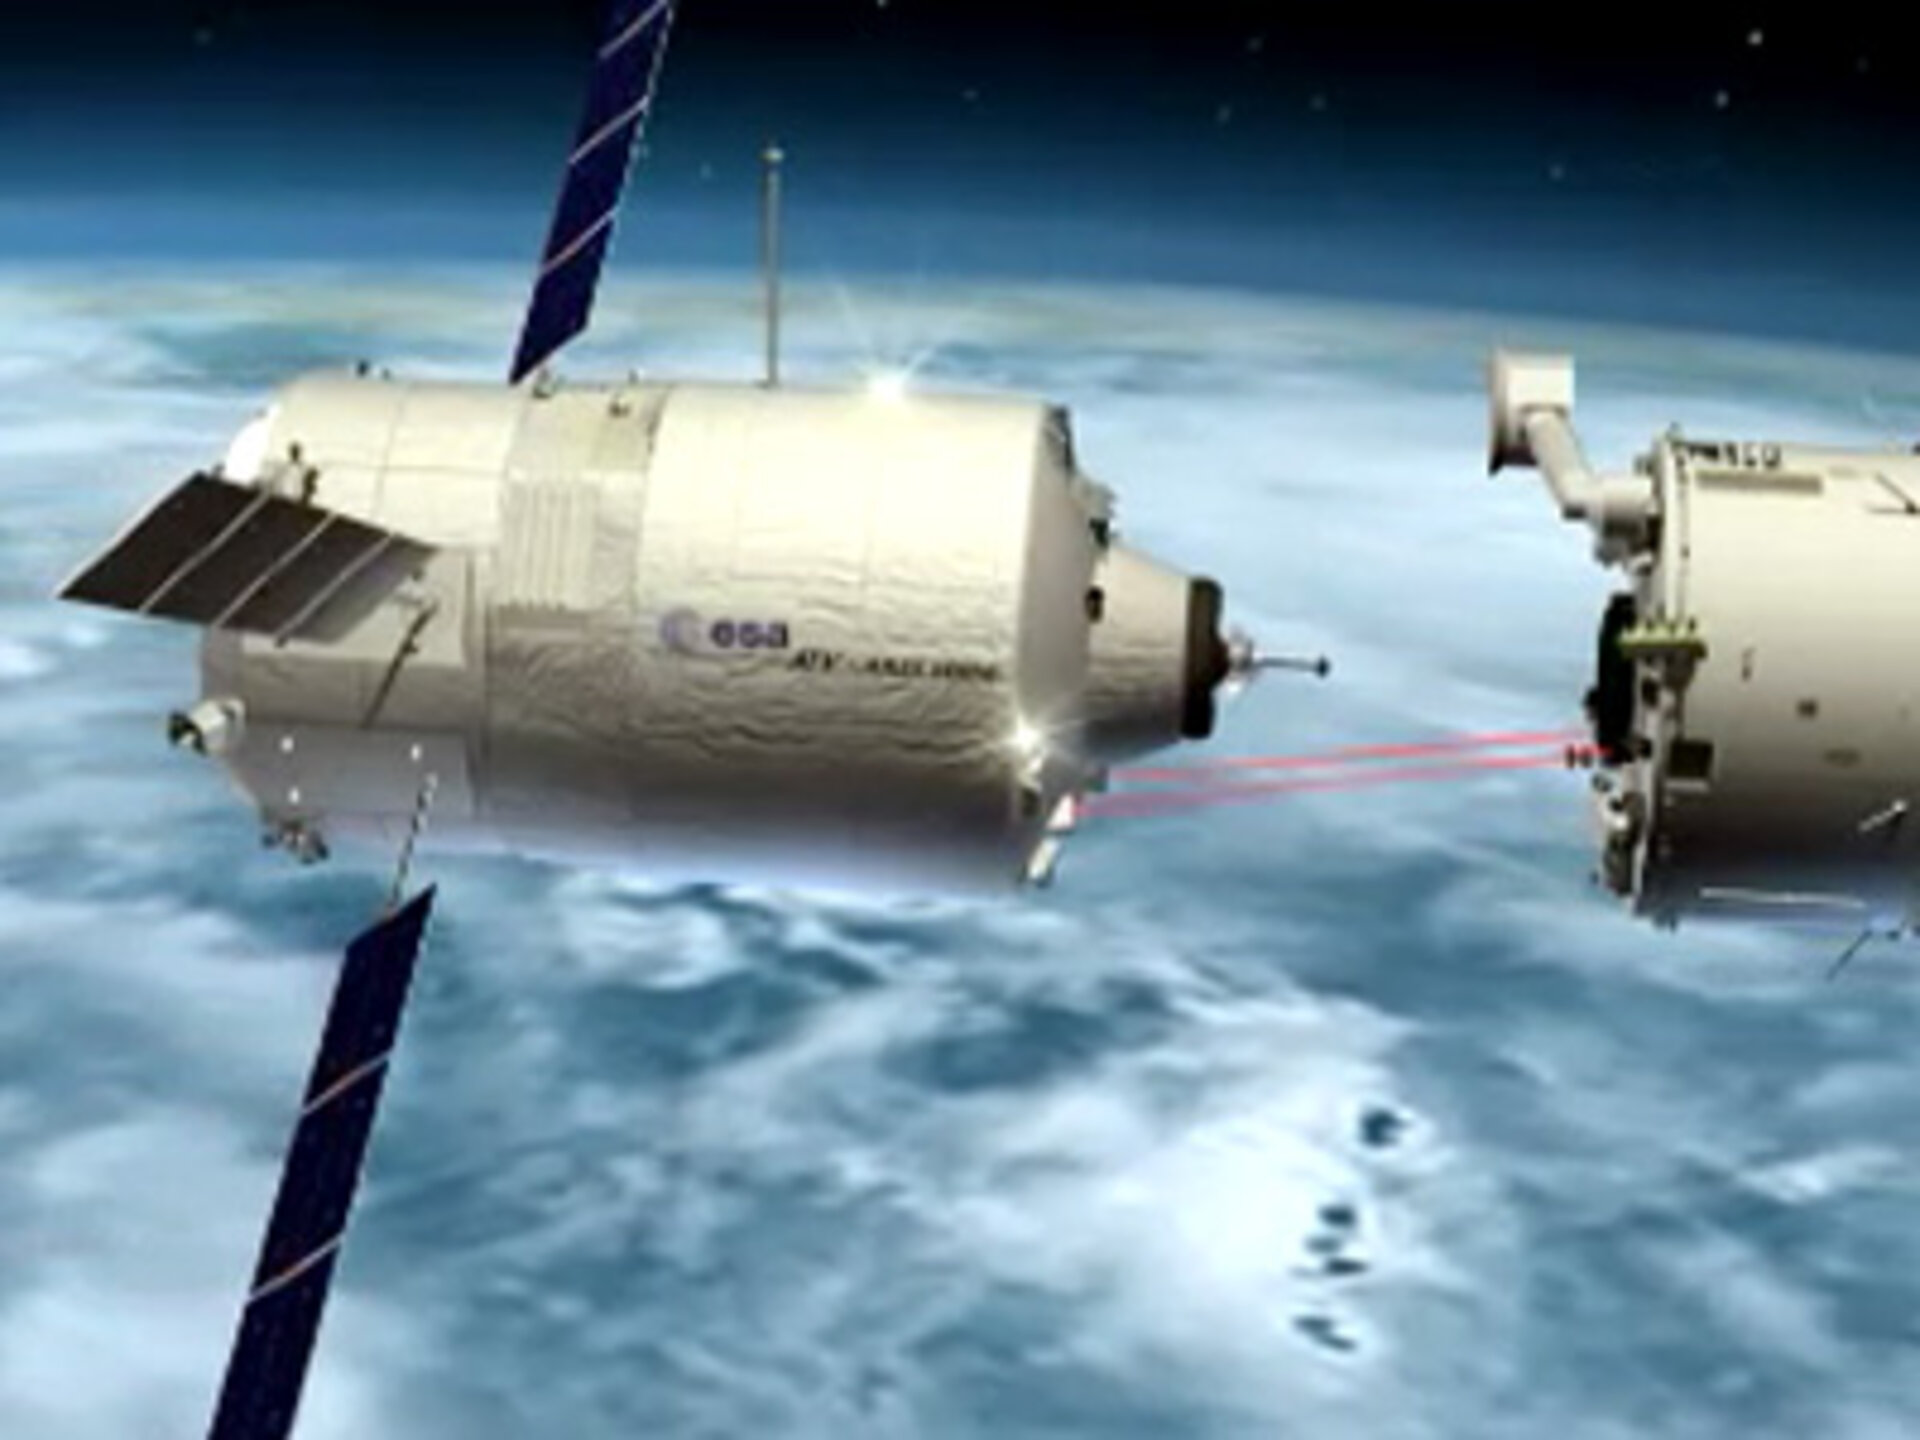 Animation illustrating the mission scenario for Europe's Automated Transfer Vehicle